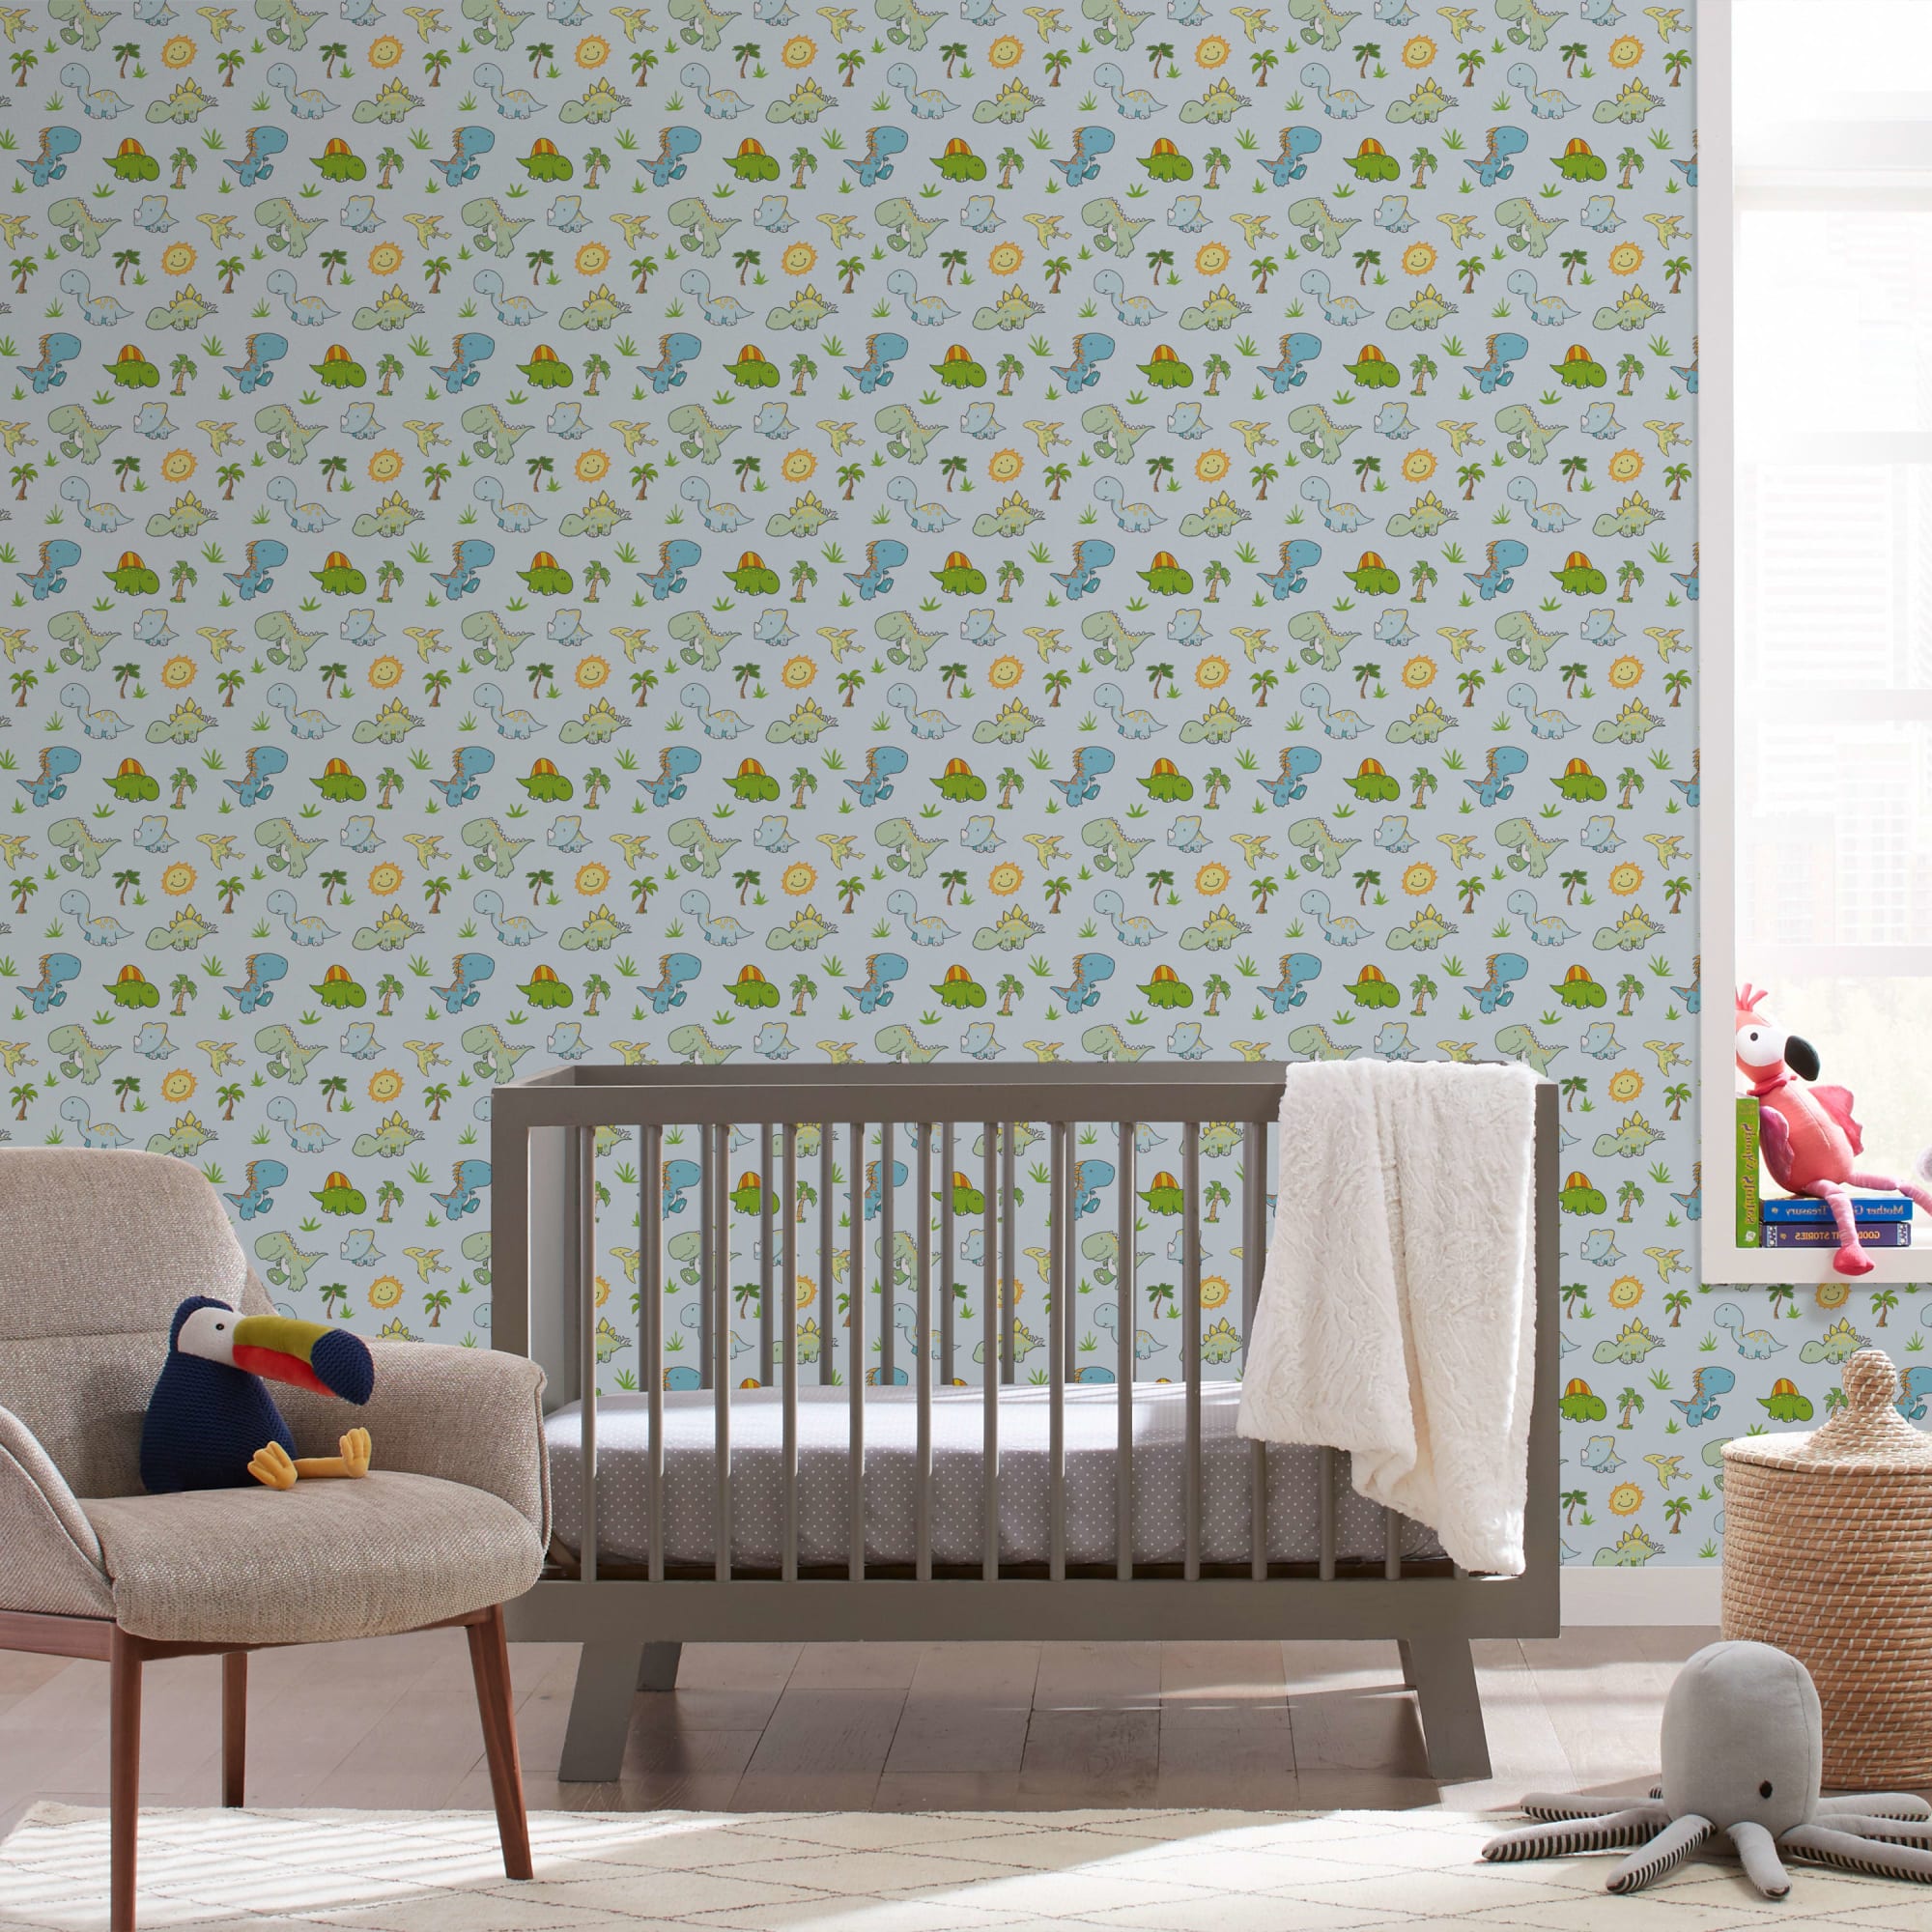 Baby Dinosaurs - Removable Vinyl Wallpaper 12" x 12" Sample by Fathead